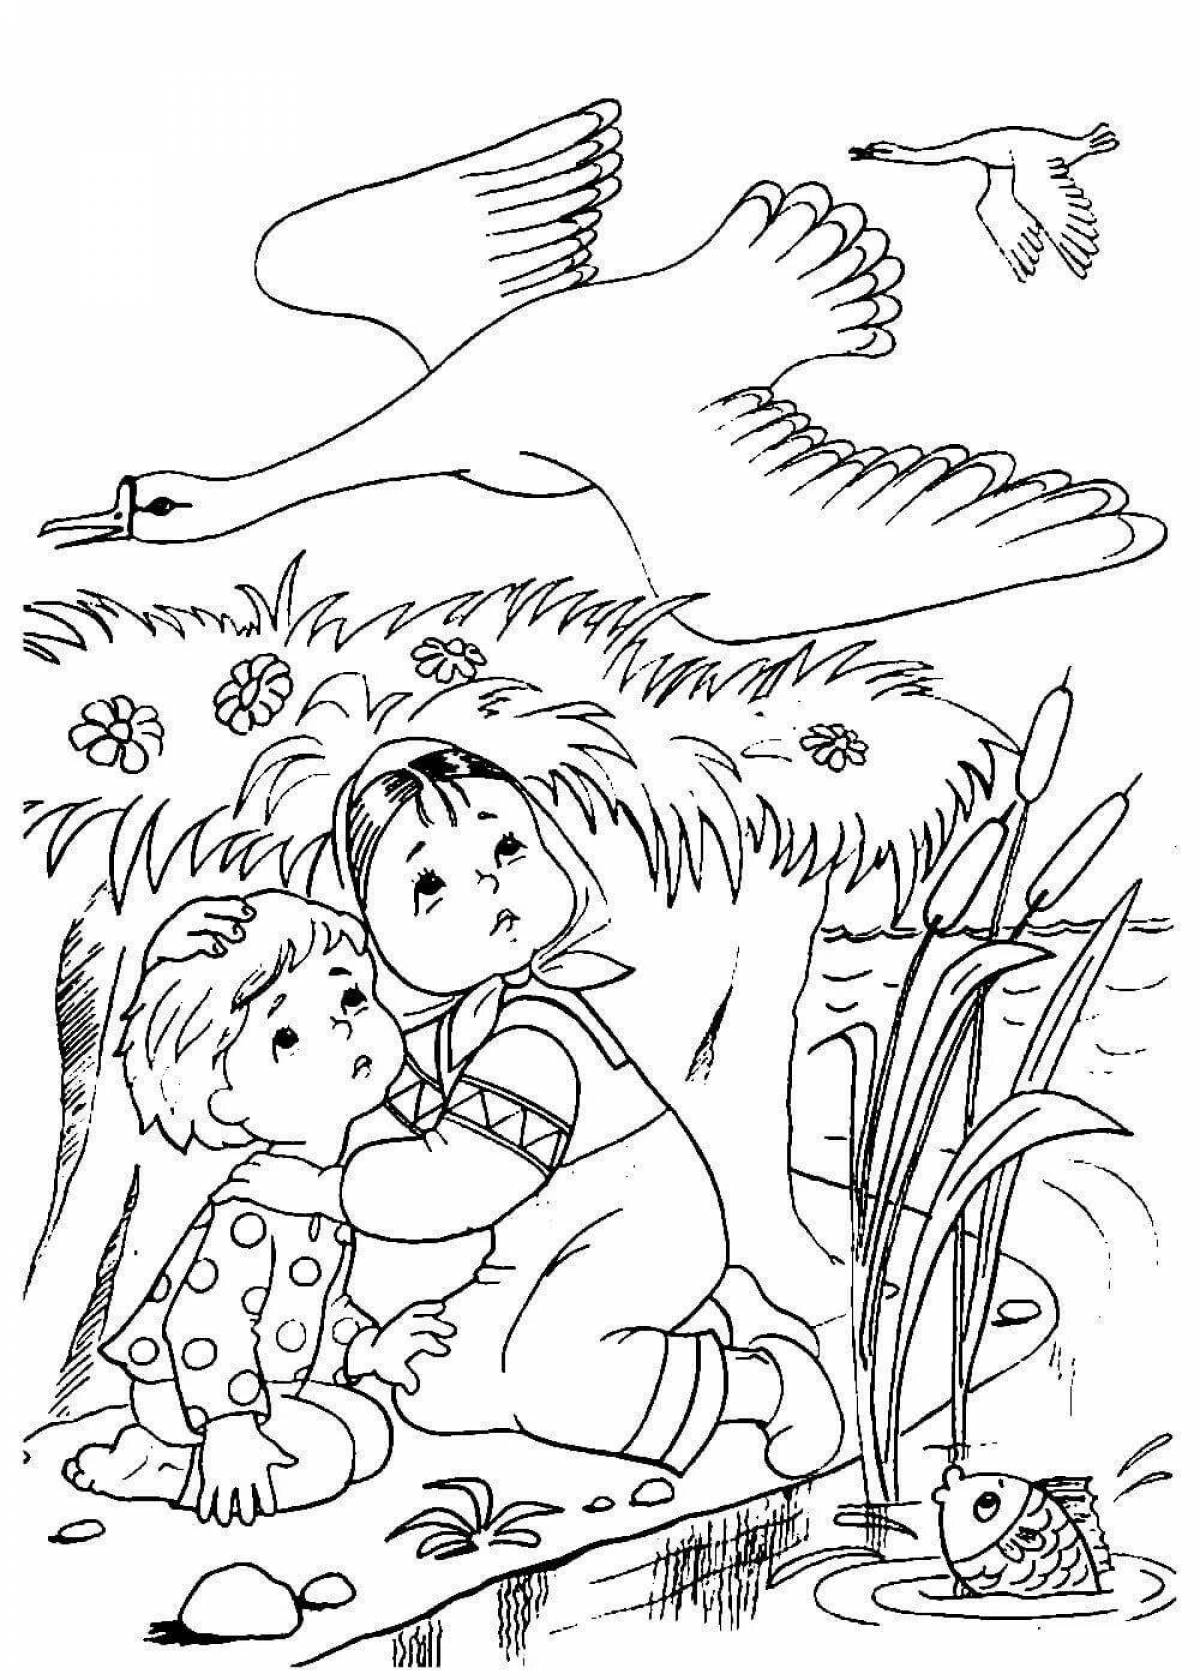 Adorable swan geese coloring pages for kids